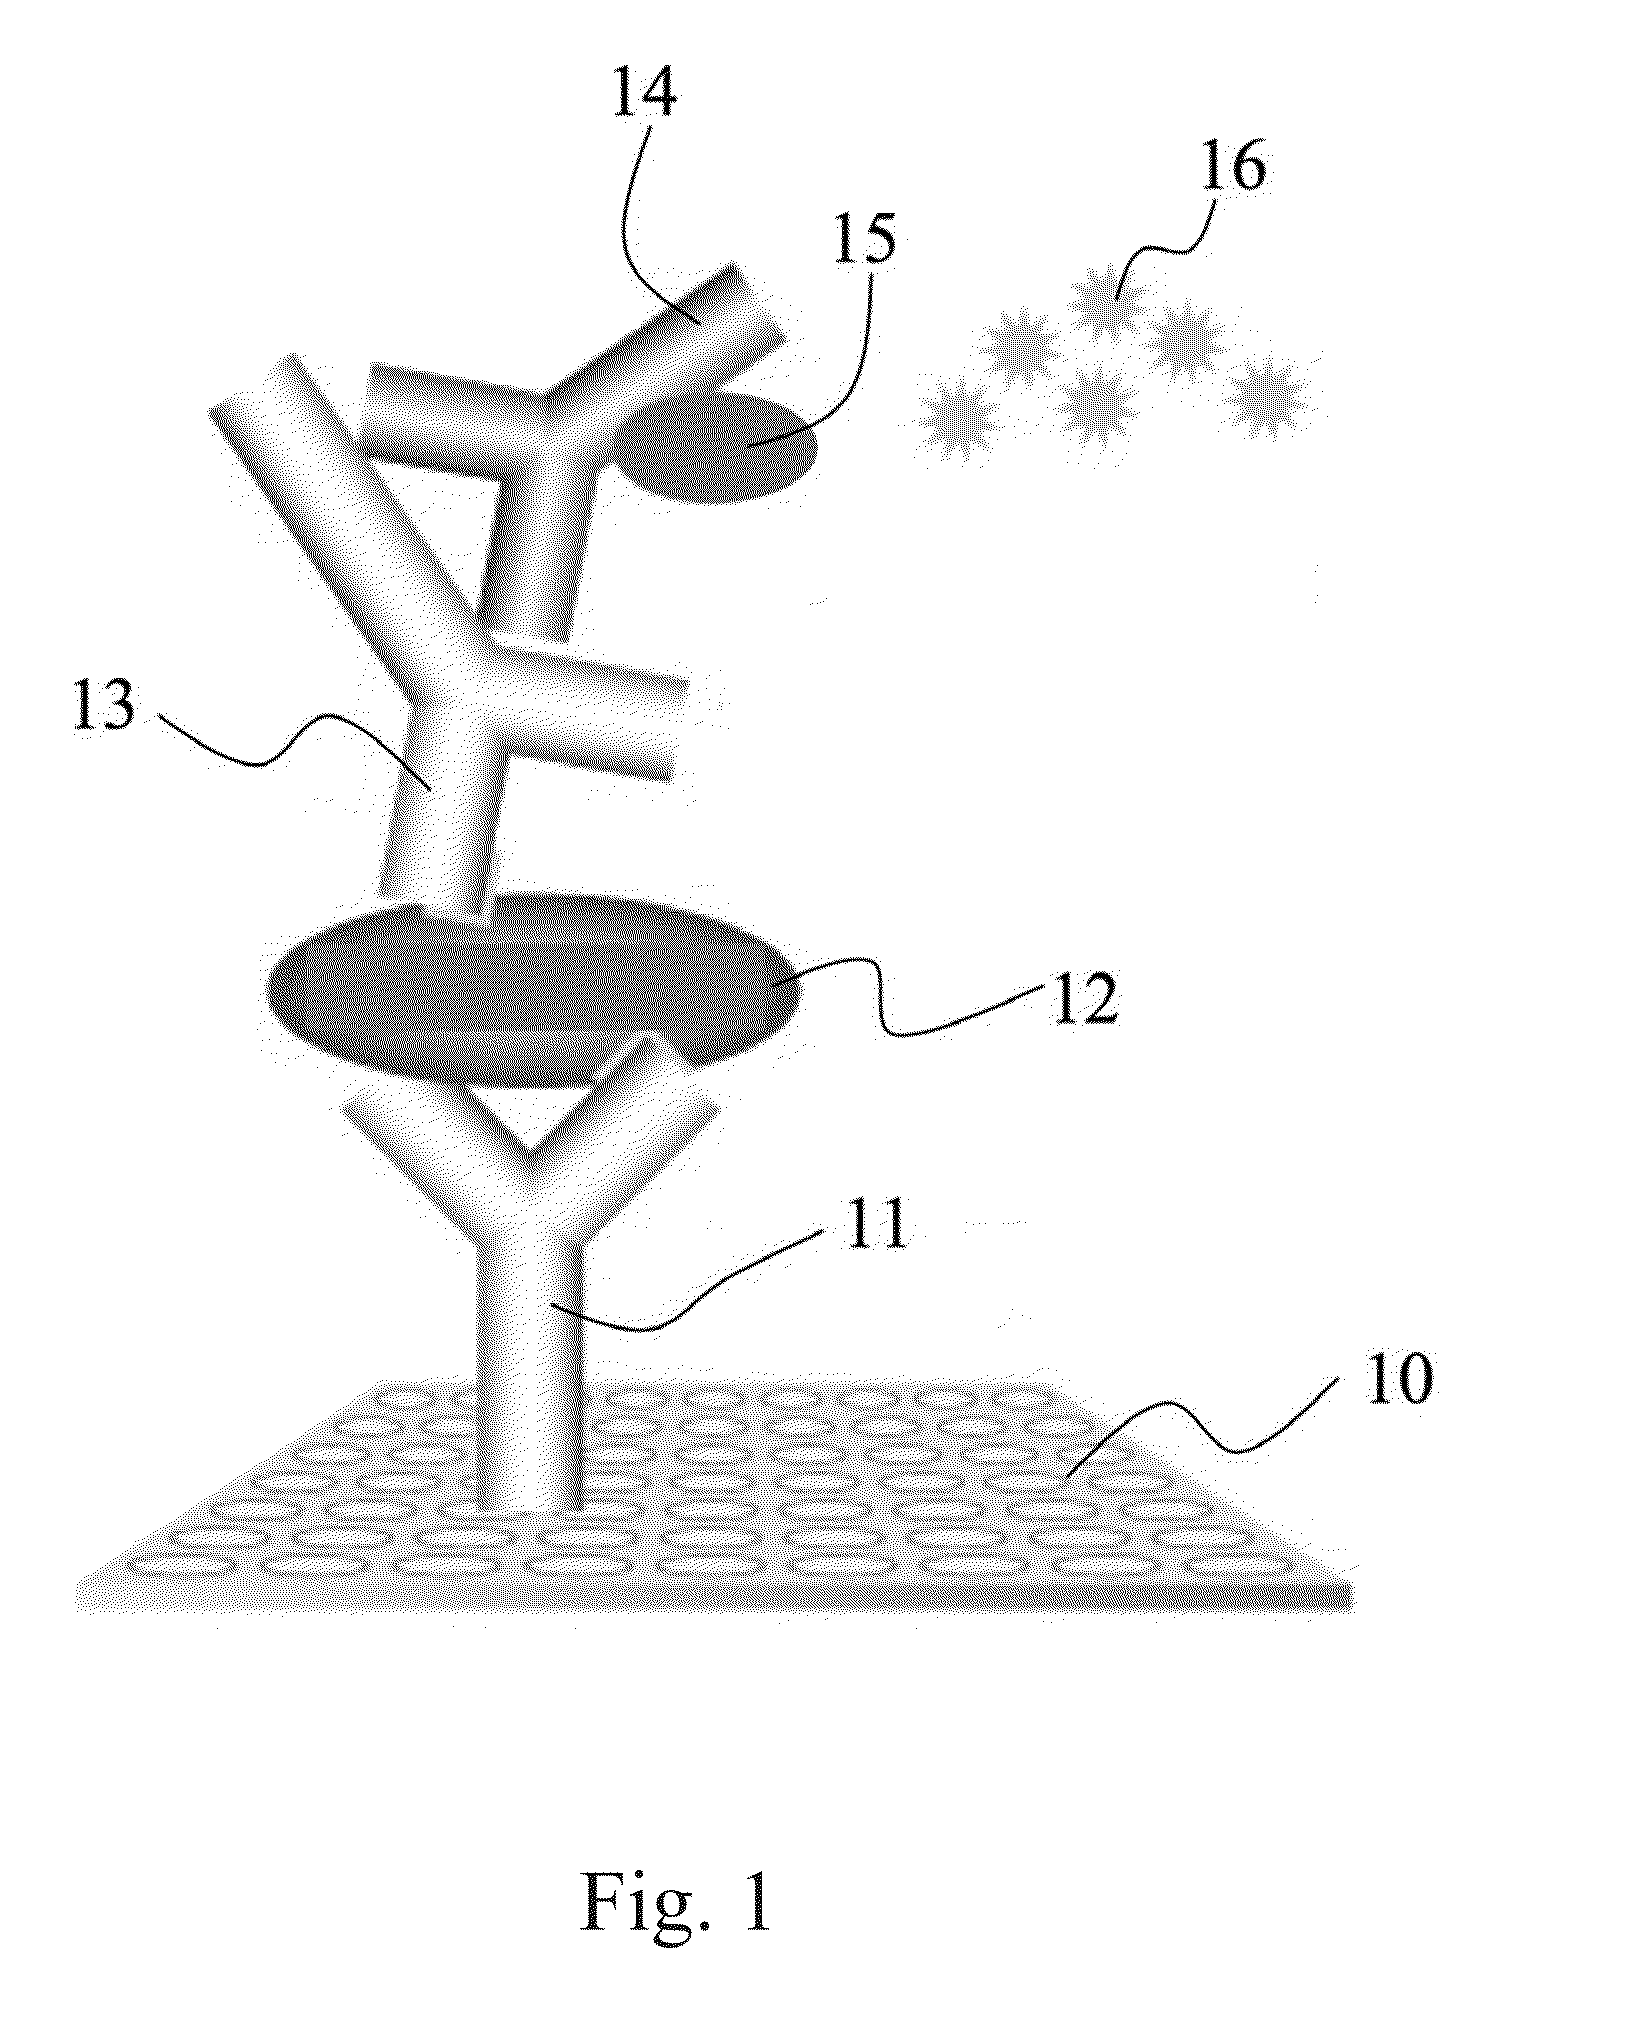 Hybridoma cell line producing monoclonal antibody against foot-and-mouth disease virus, the monoclonal antibody therefrom, immunoassay reagent and kit, and immunoassay method